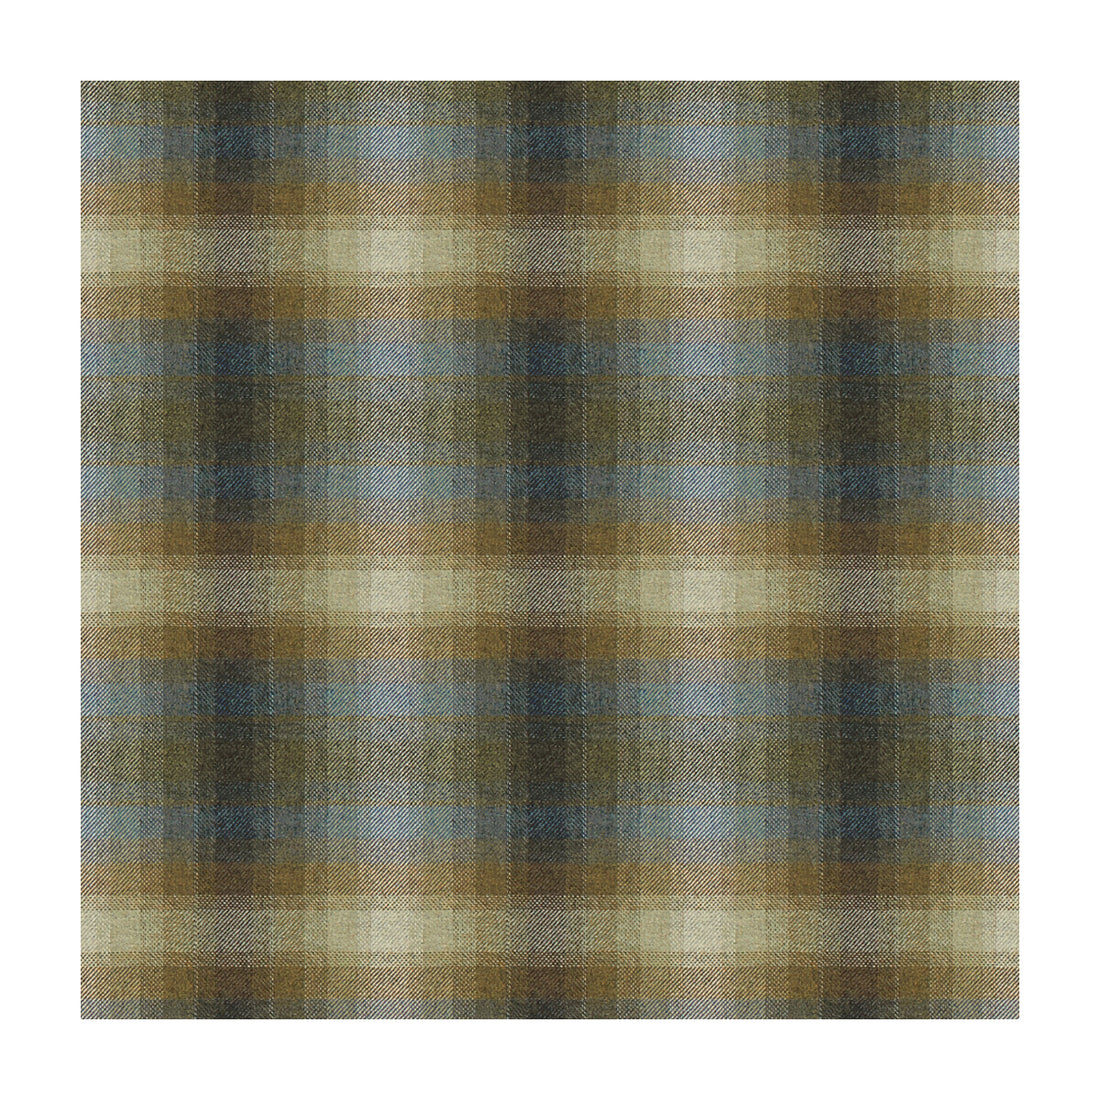 Toboggan Plaid fabric in bluejay color - pattern 33912.516.0 - by Kravet Couture in the Barbara Barry Chalet collection